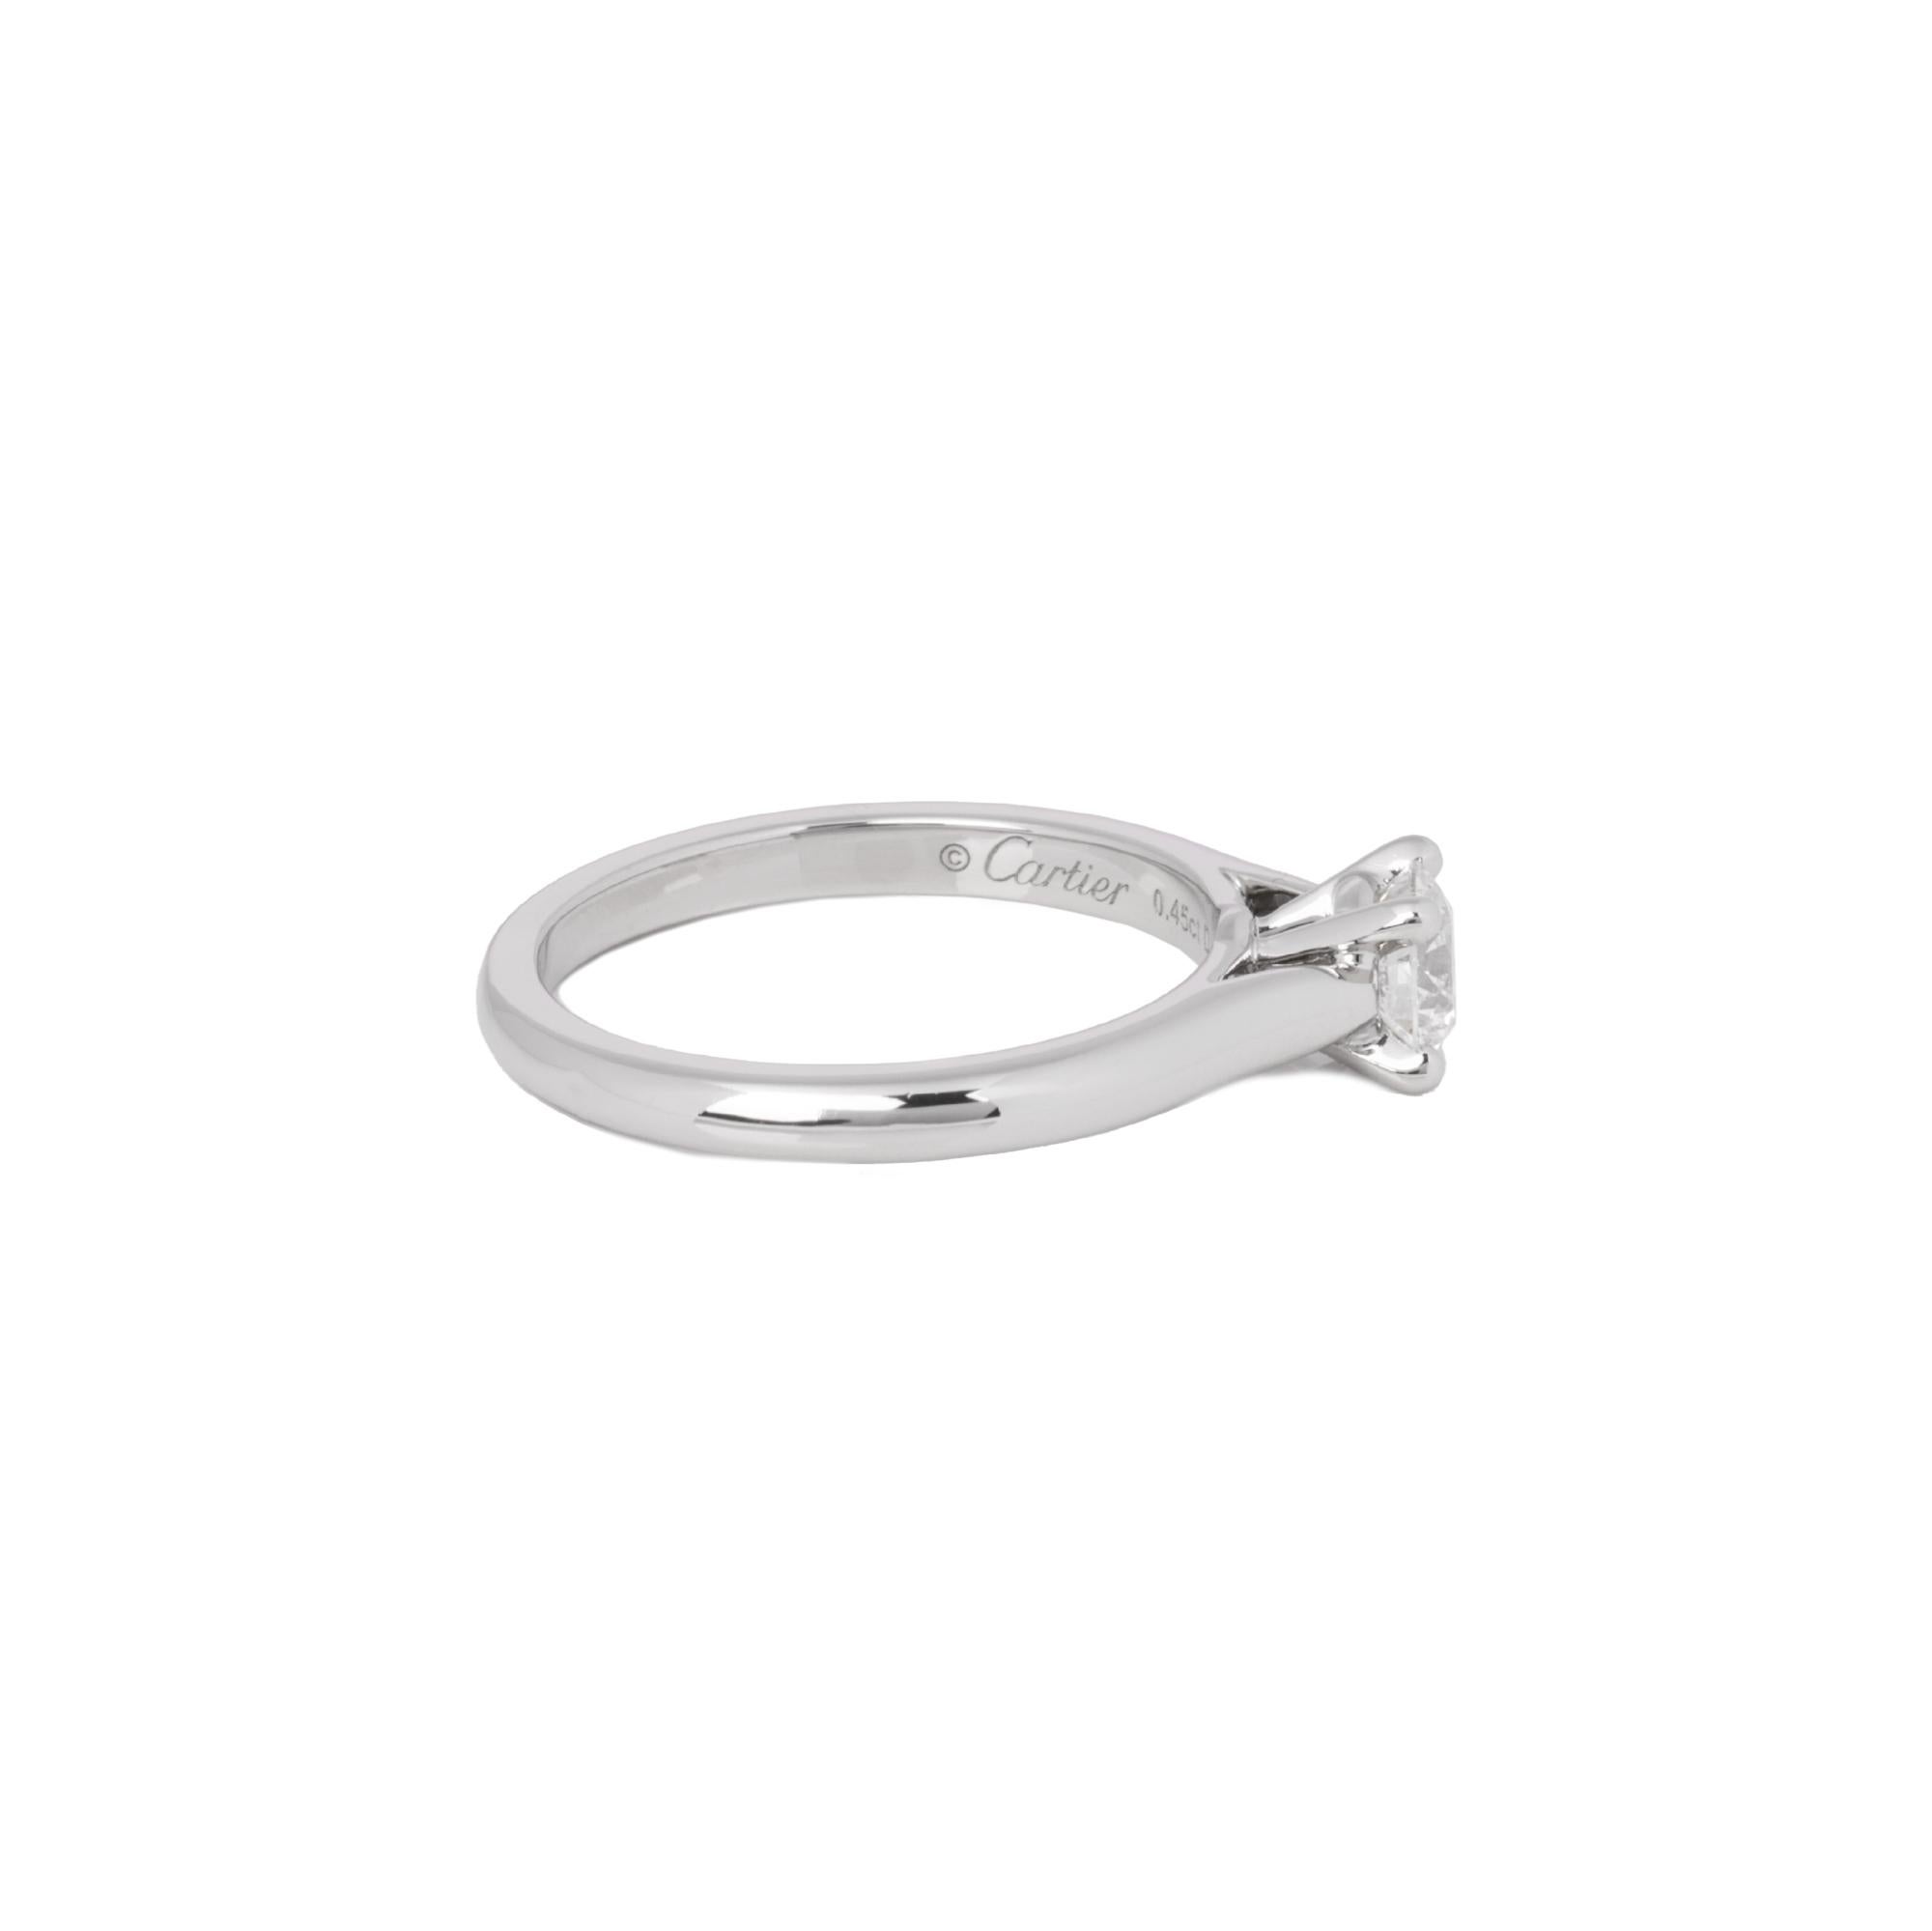 Cartier 0.45ct Brilliant Cut Solitaire Diamond Platinum 1895 Ring

Brand Cartier
Model 0.45ct Diamond 1895 Ring
Product Type Ring
Serial Number CJ****
Age Circa 2016
Accompanied By Cartier Box, Certificate, GIA Certificate
Material(s)